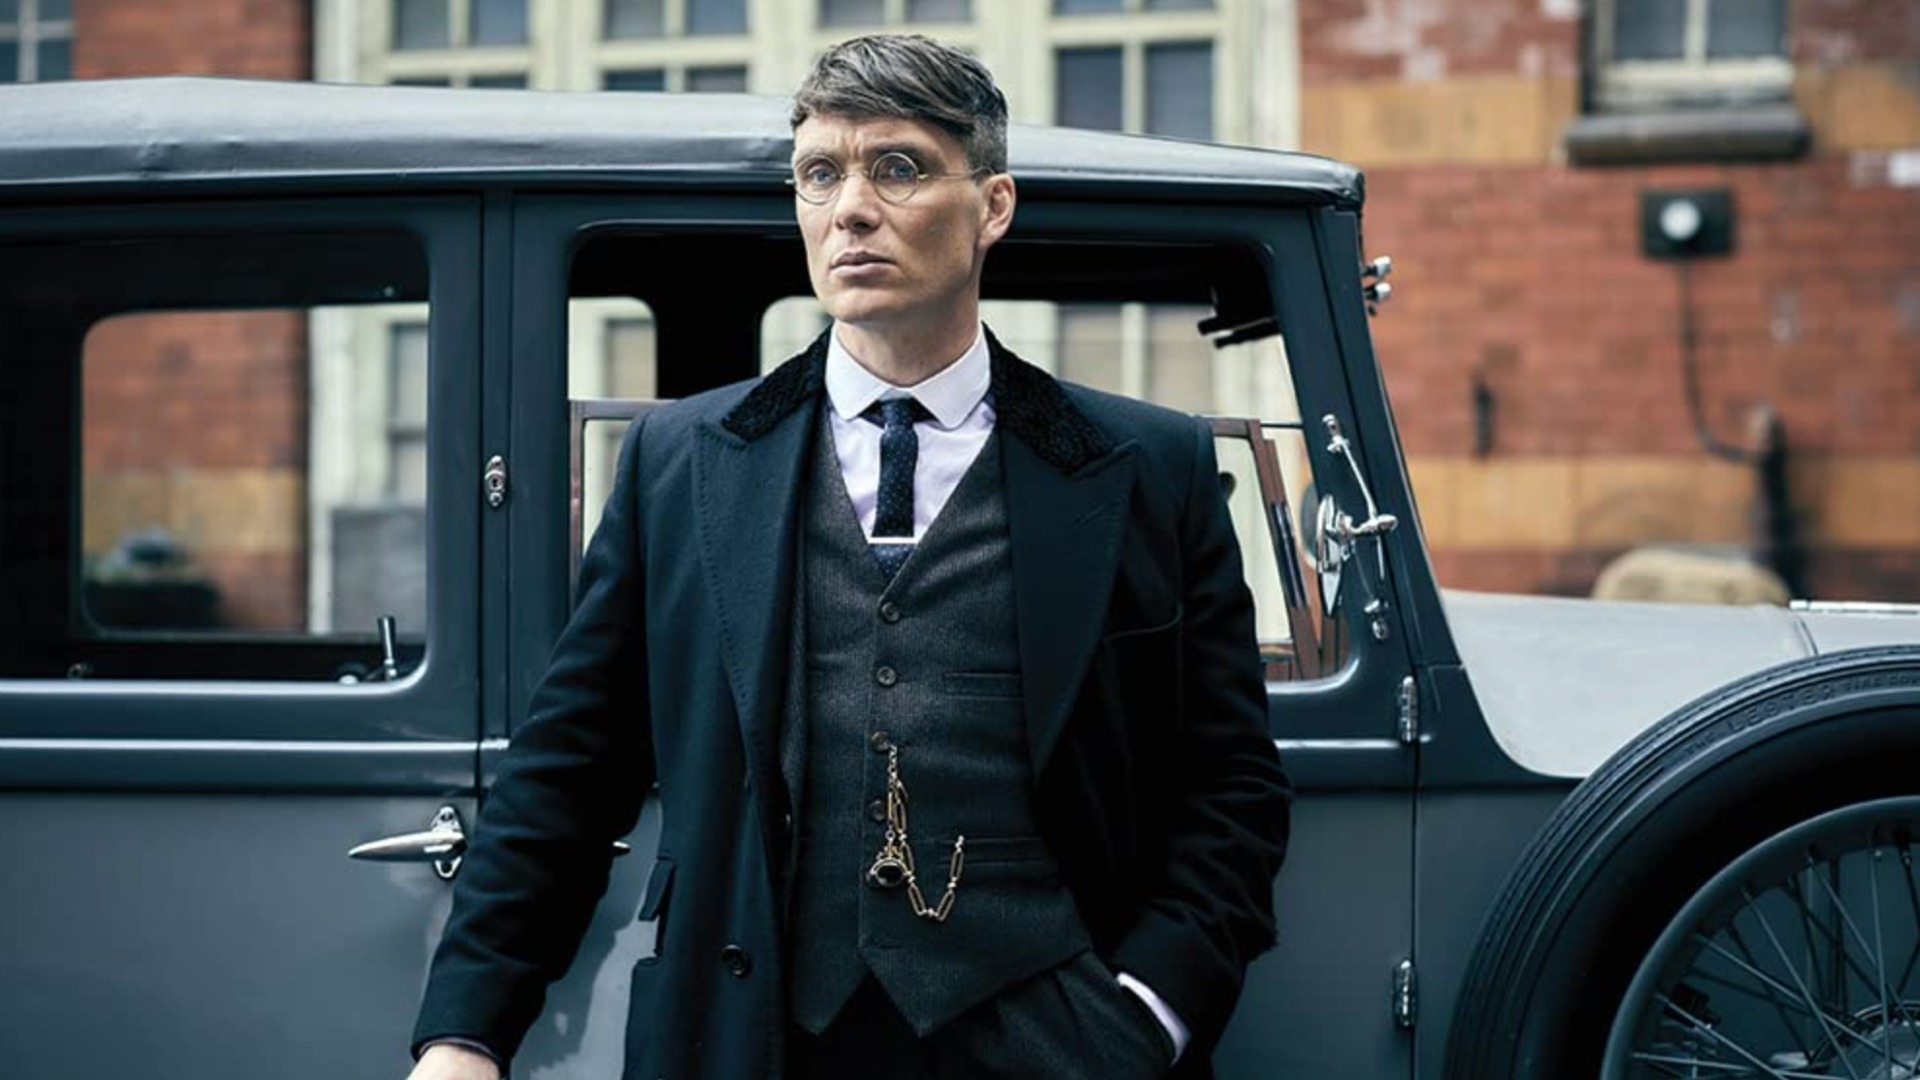 Peaky Blinders movie is ready to go and has a bigger budget: "Cillian Murphy is really up for it"